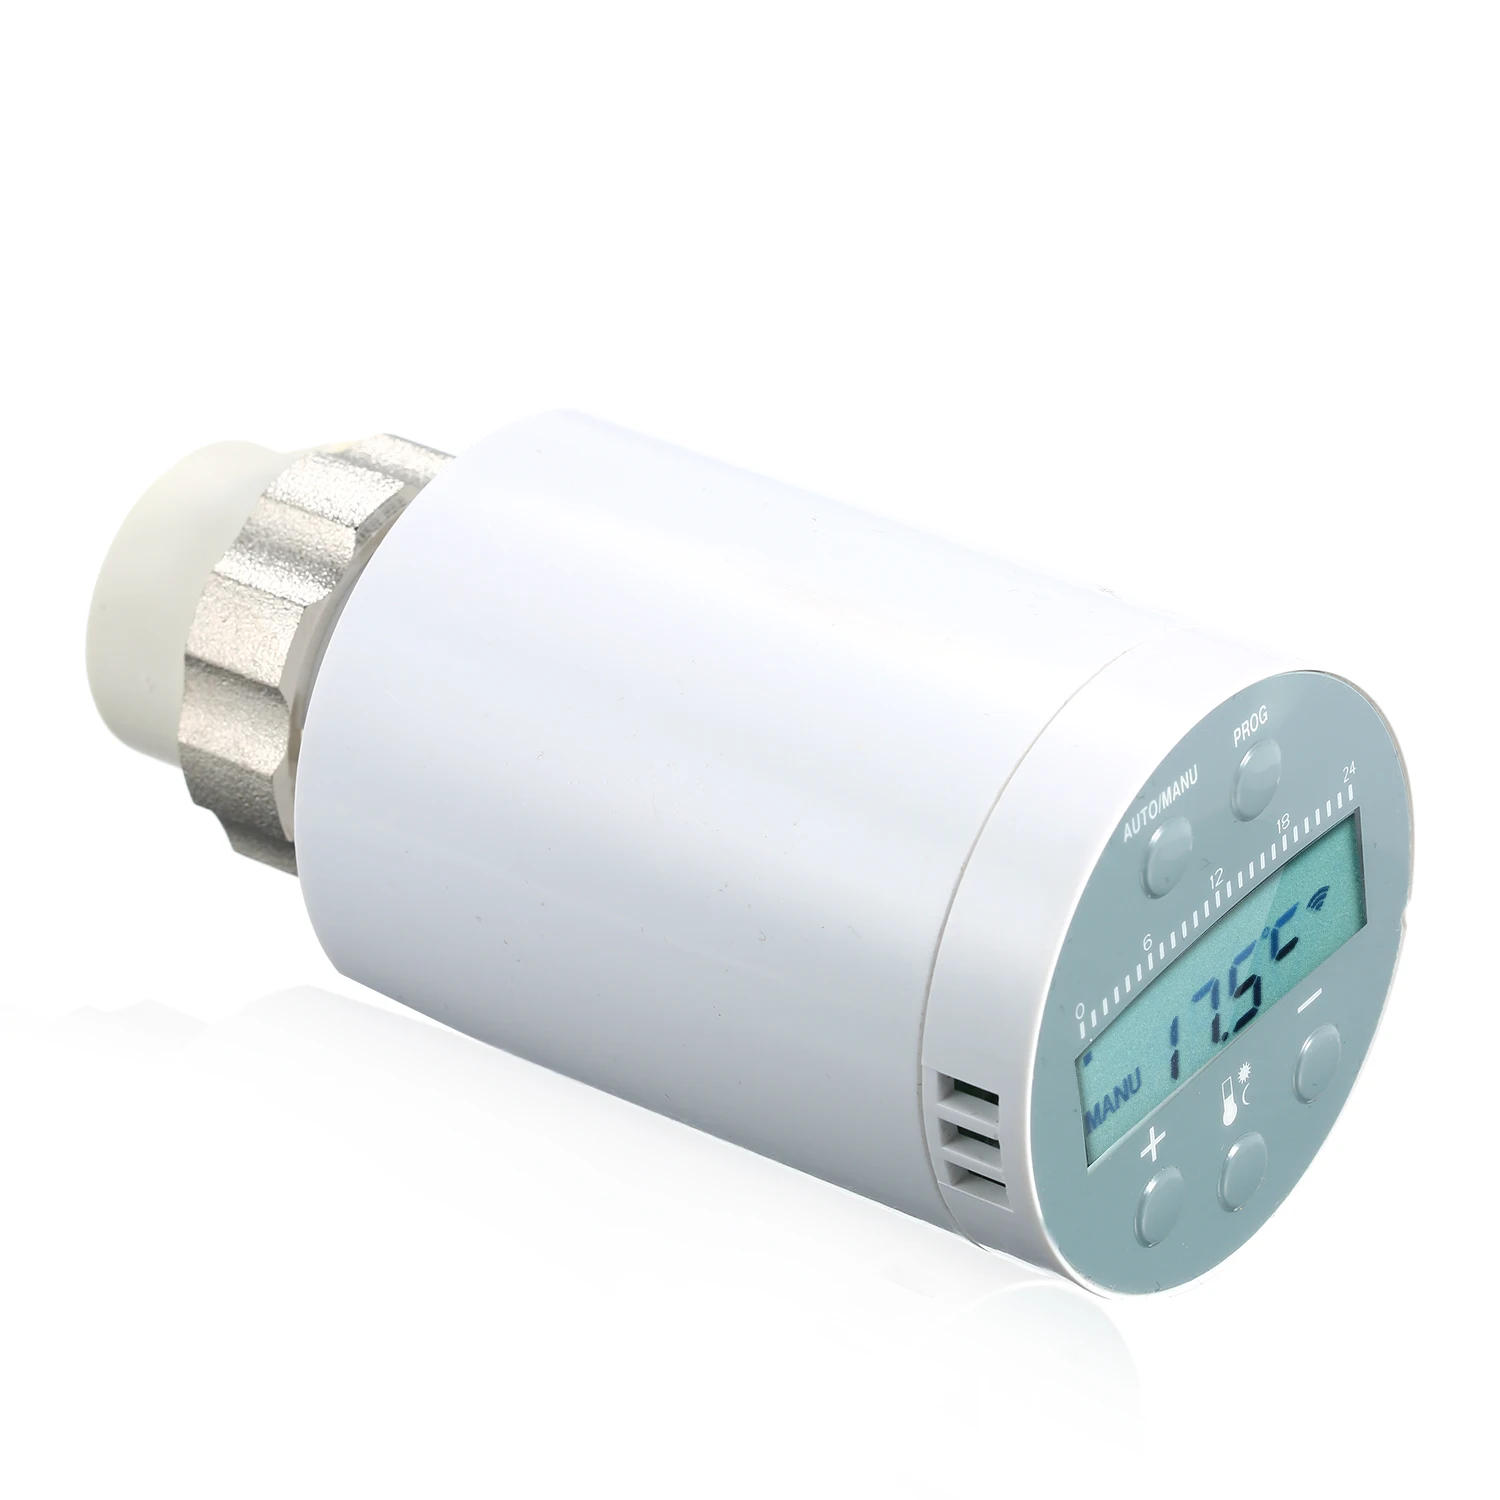 

SEA801-APP Thermostat Temperature Controller Heating Accurate TRV Thermostatic Radiator Valve Programmable Voice Remote Control